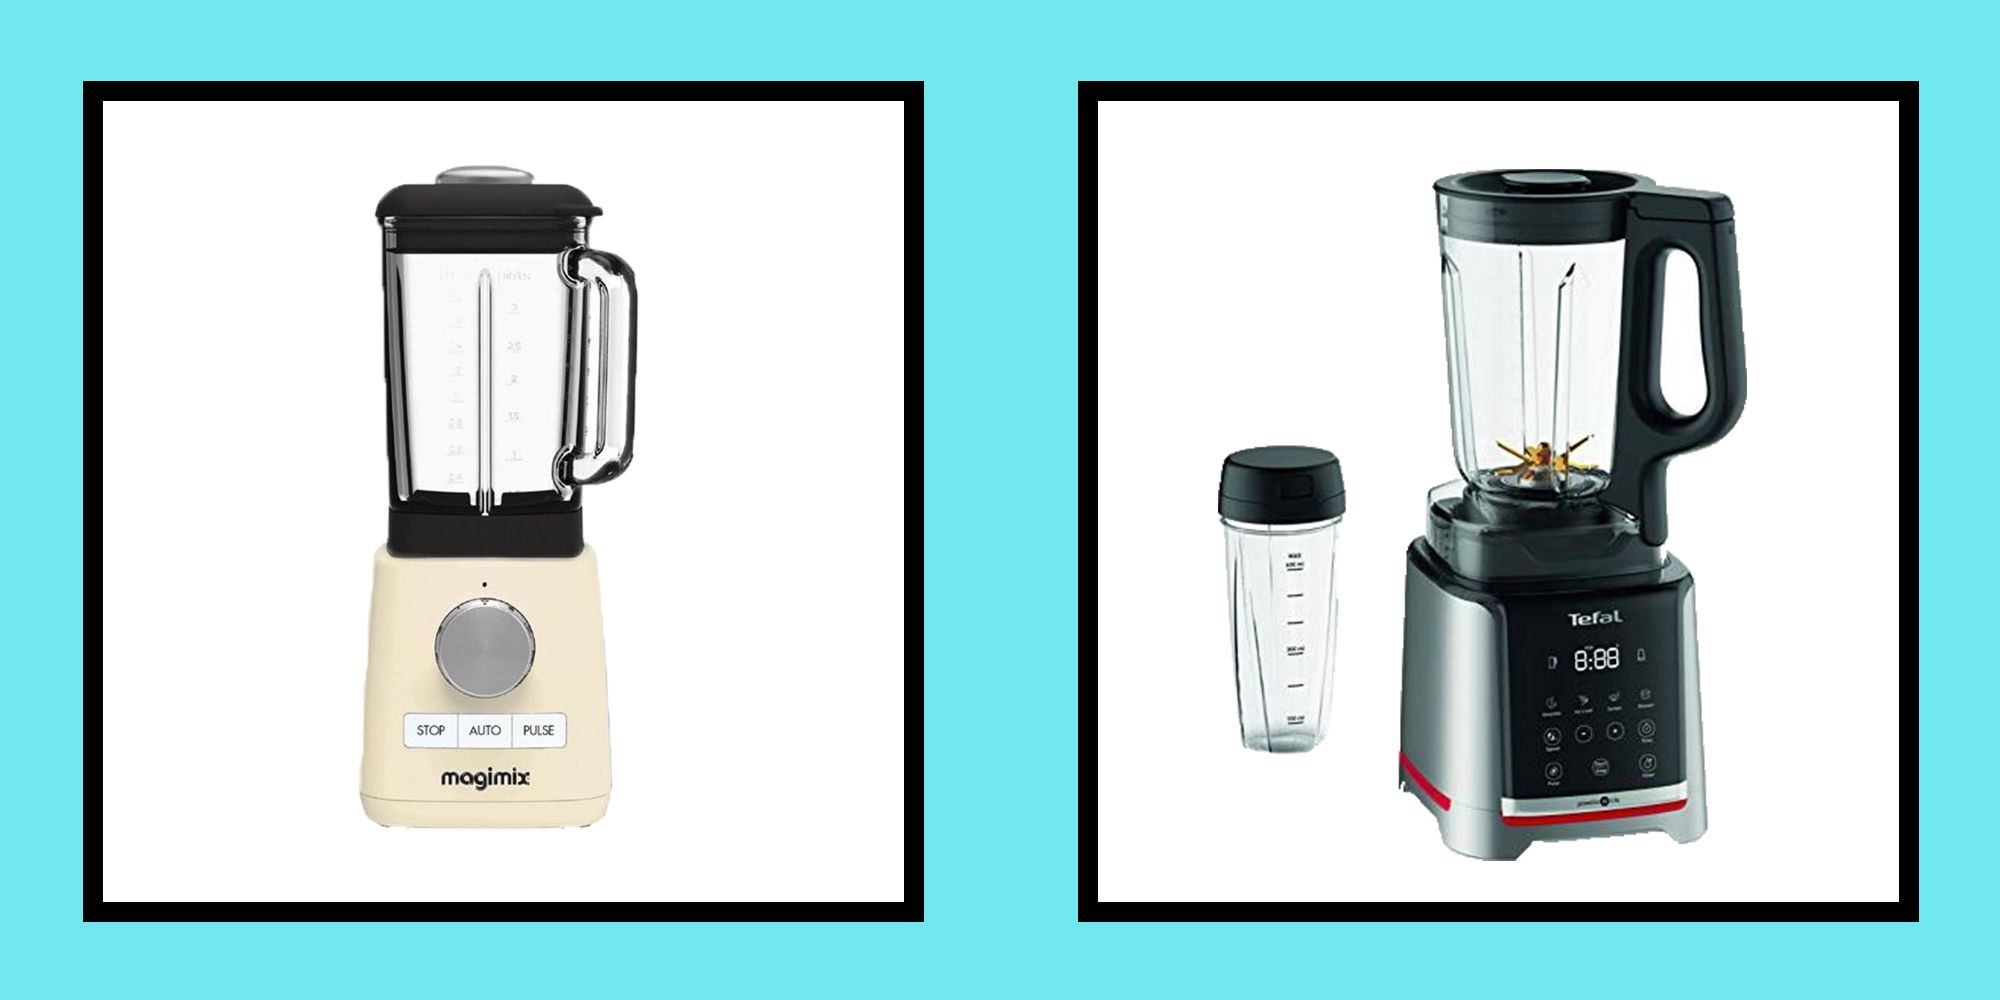 Blender and Kitchen Robot for shakes and soups Ninja® - Claudia&Julia